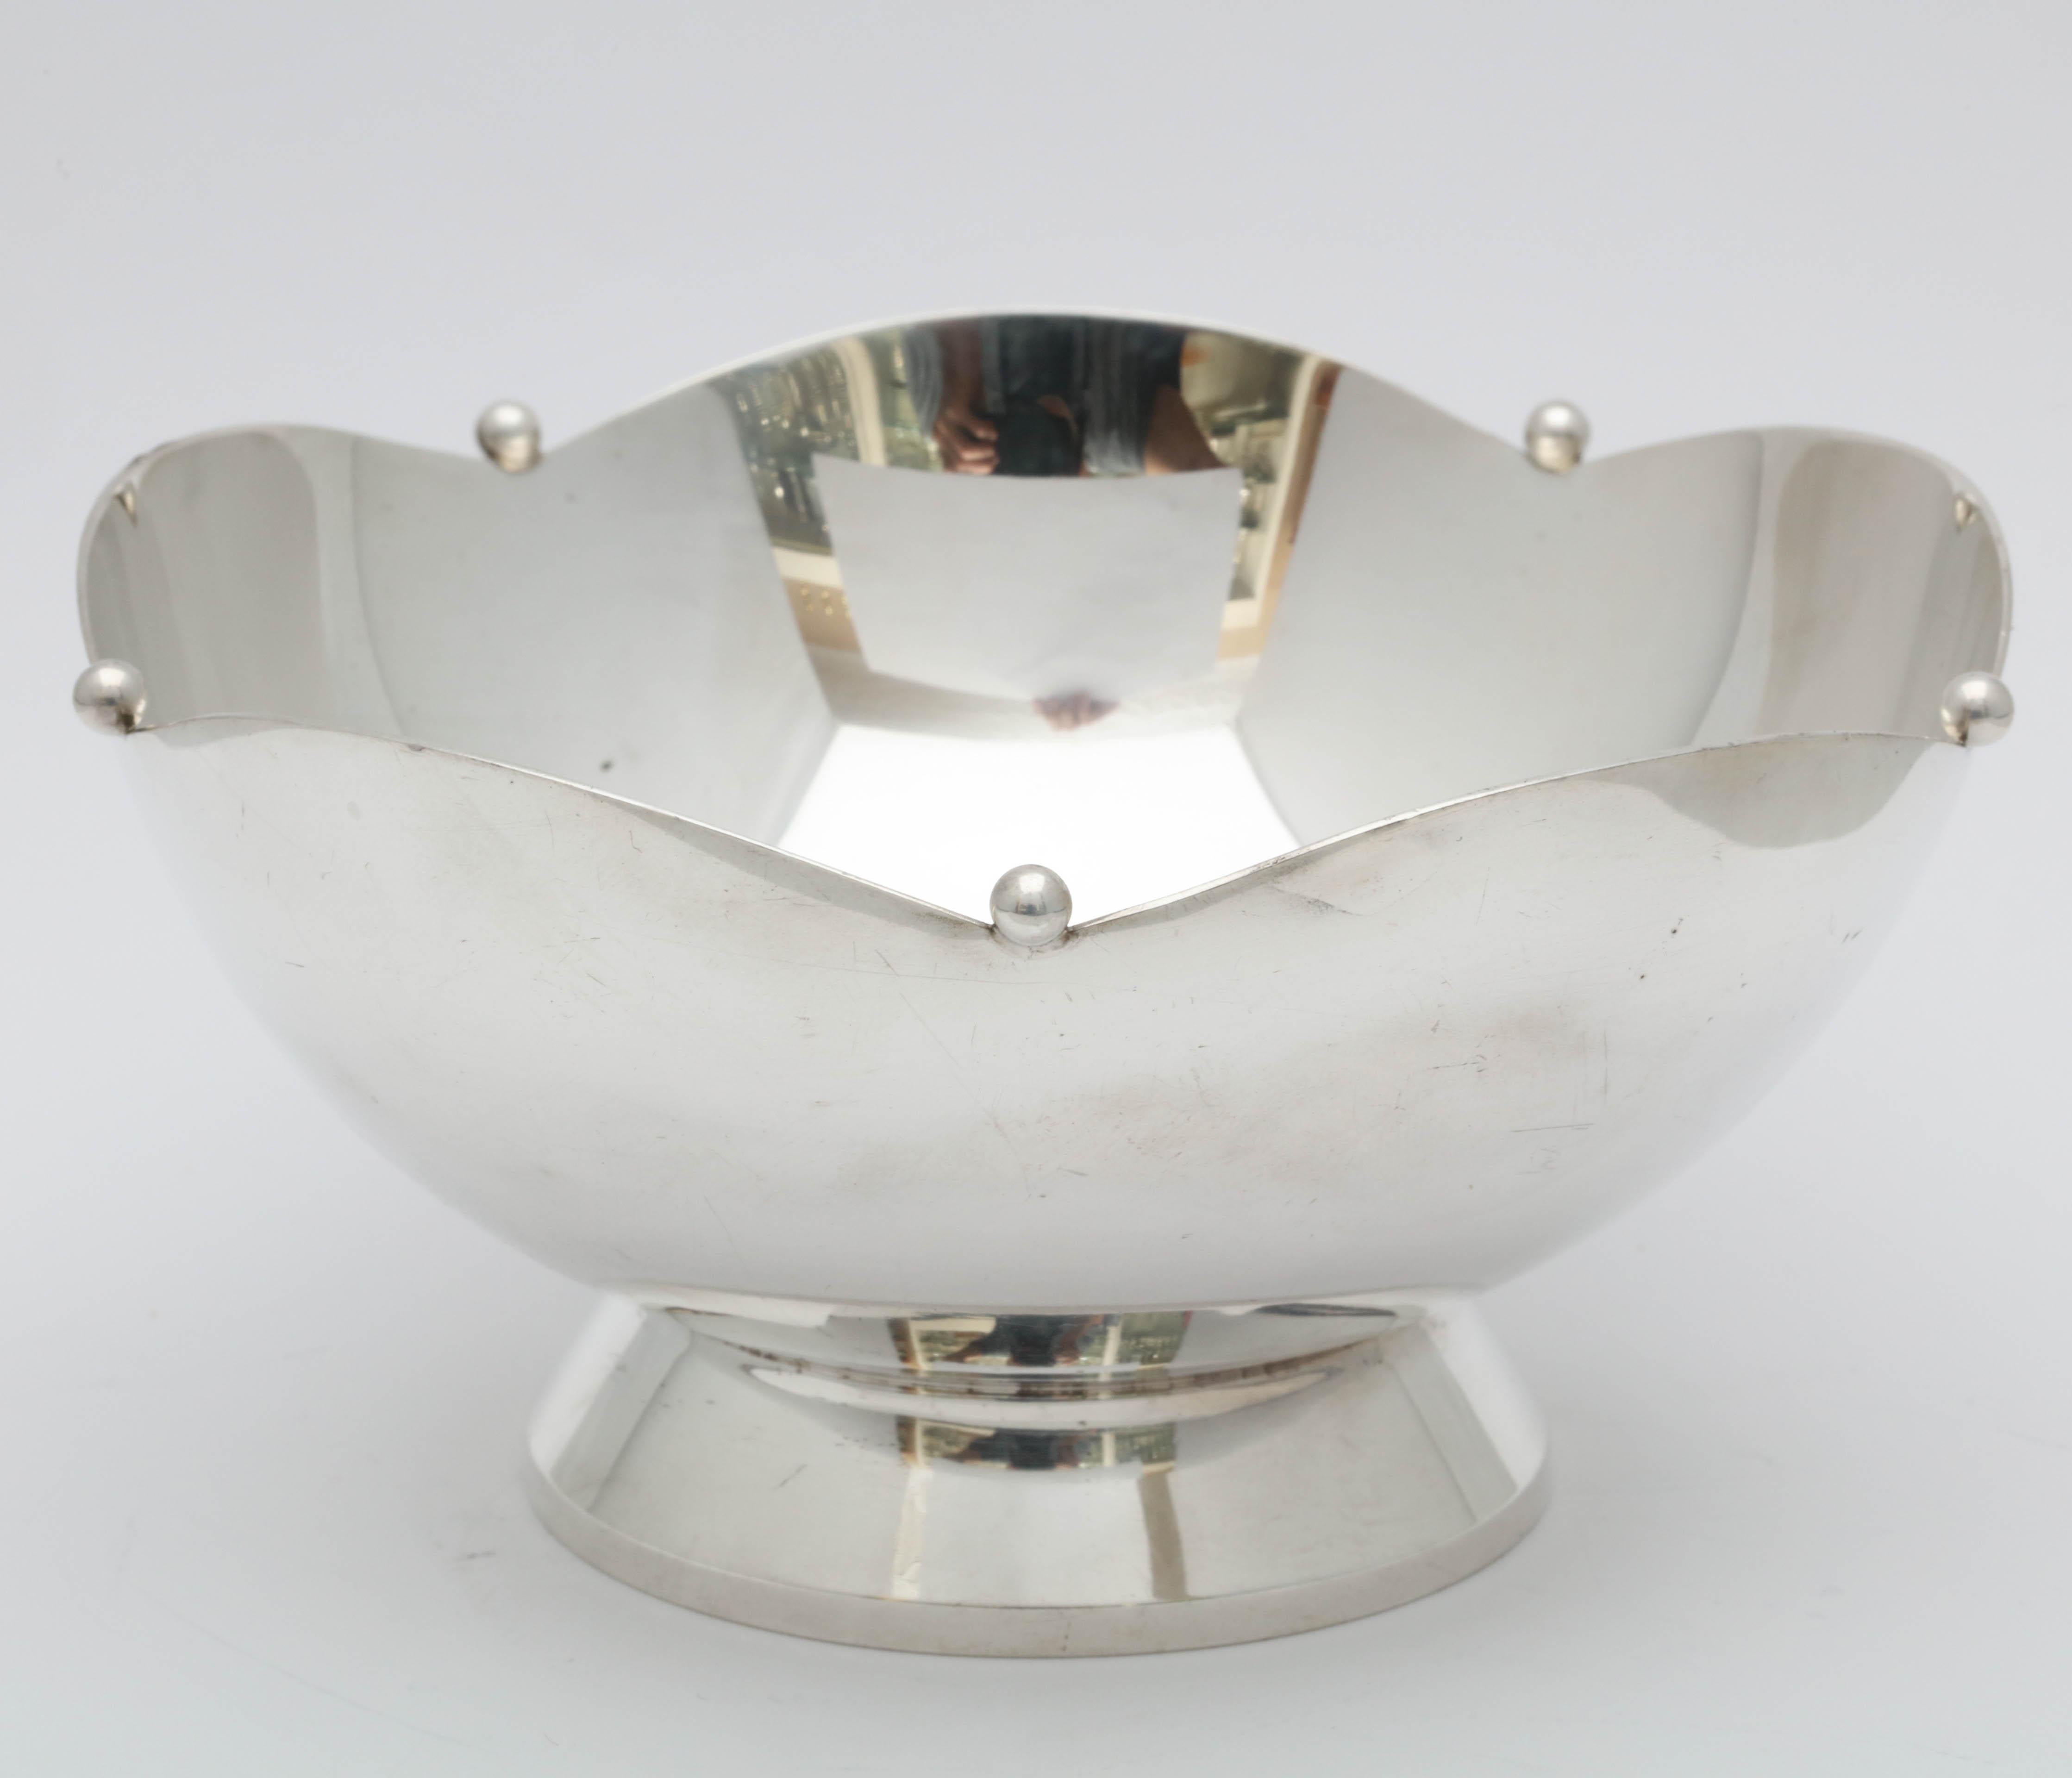 Art Deco, sterling silver, pedestal-based, mints/nuts bowl (having many other uses!), Currier and Roby Co., New York, circa 1920s-1930s. Measures: 2 3/4 inches high x 5 1/8 inches in diameter. Weighs 5.405 troy ounces. Dark spots in photos are